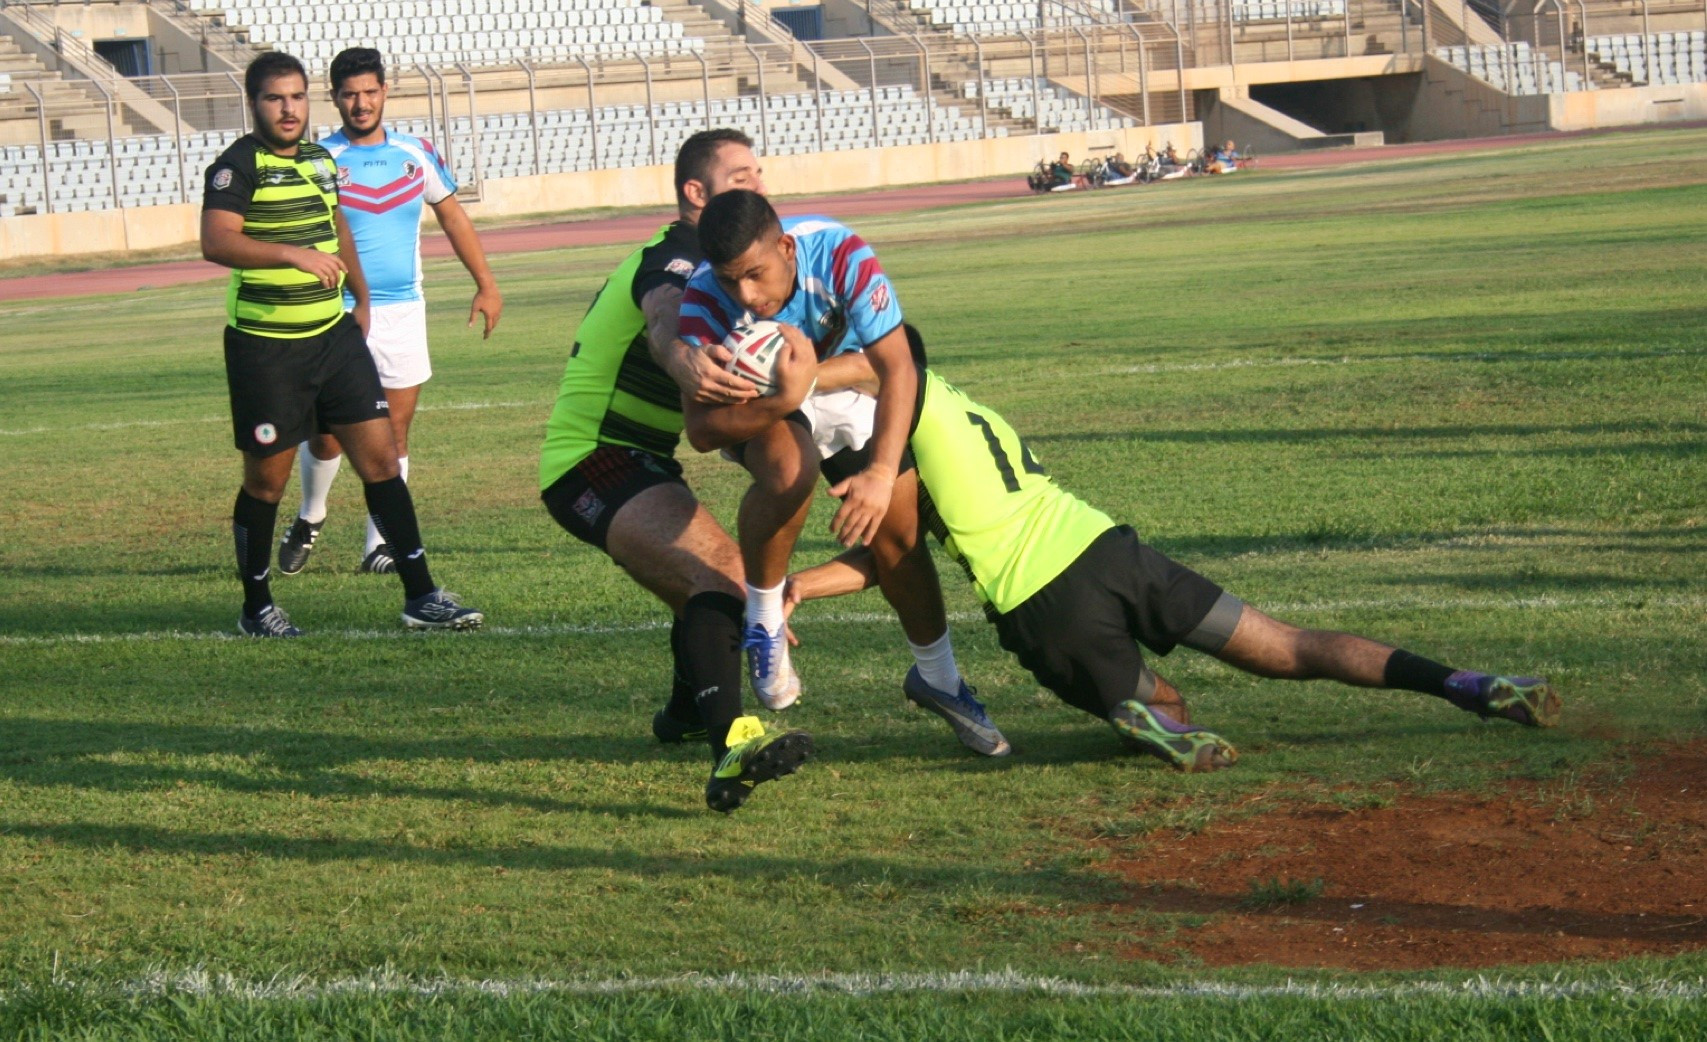 LEBANON RUGBY LEAGUE GRAND FINAL TO BE LIVE STREAMED TONIGHT